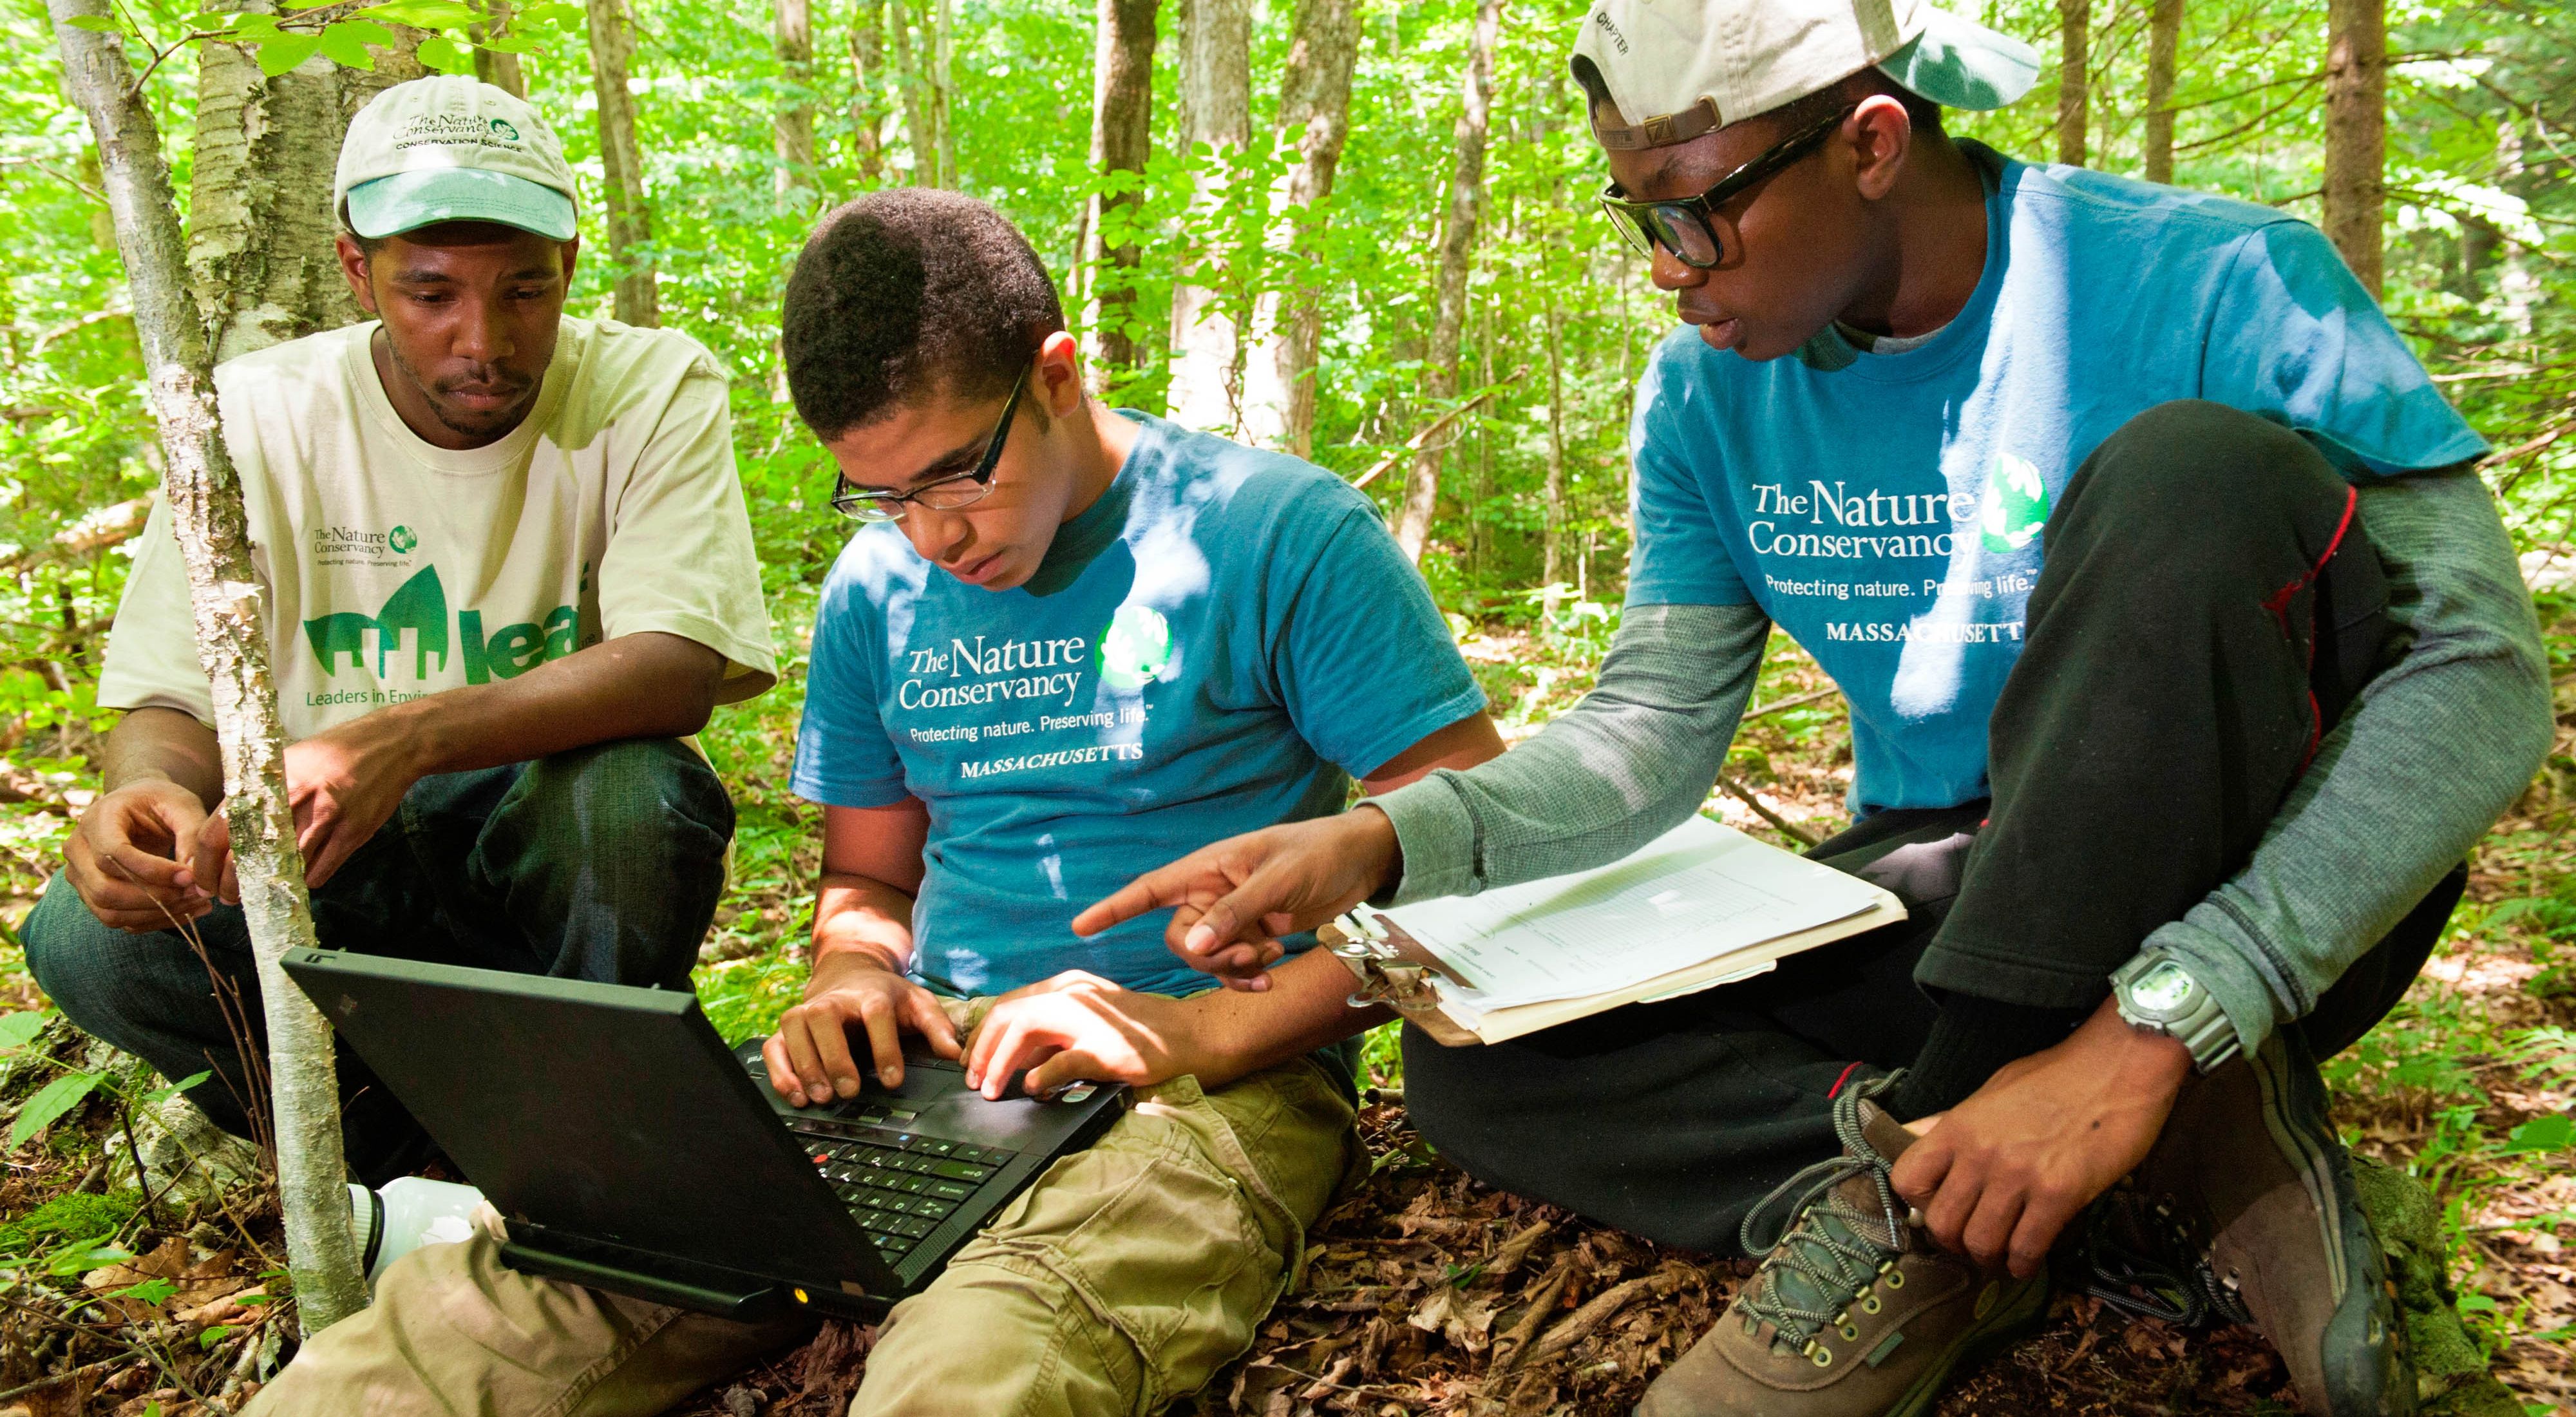 Three young people work on a laptop computer in a forest.